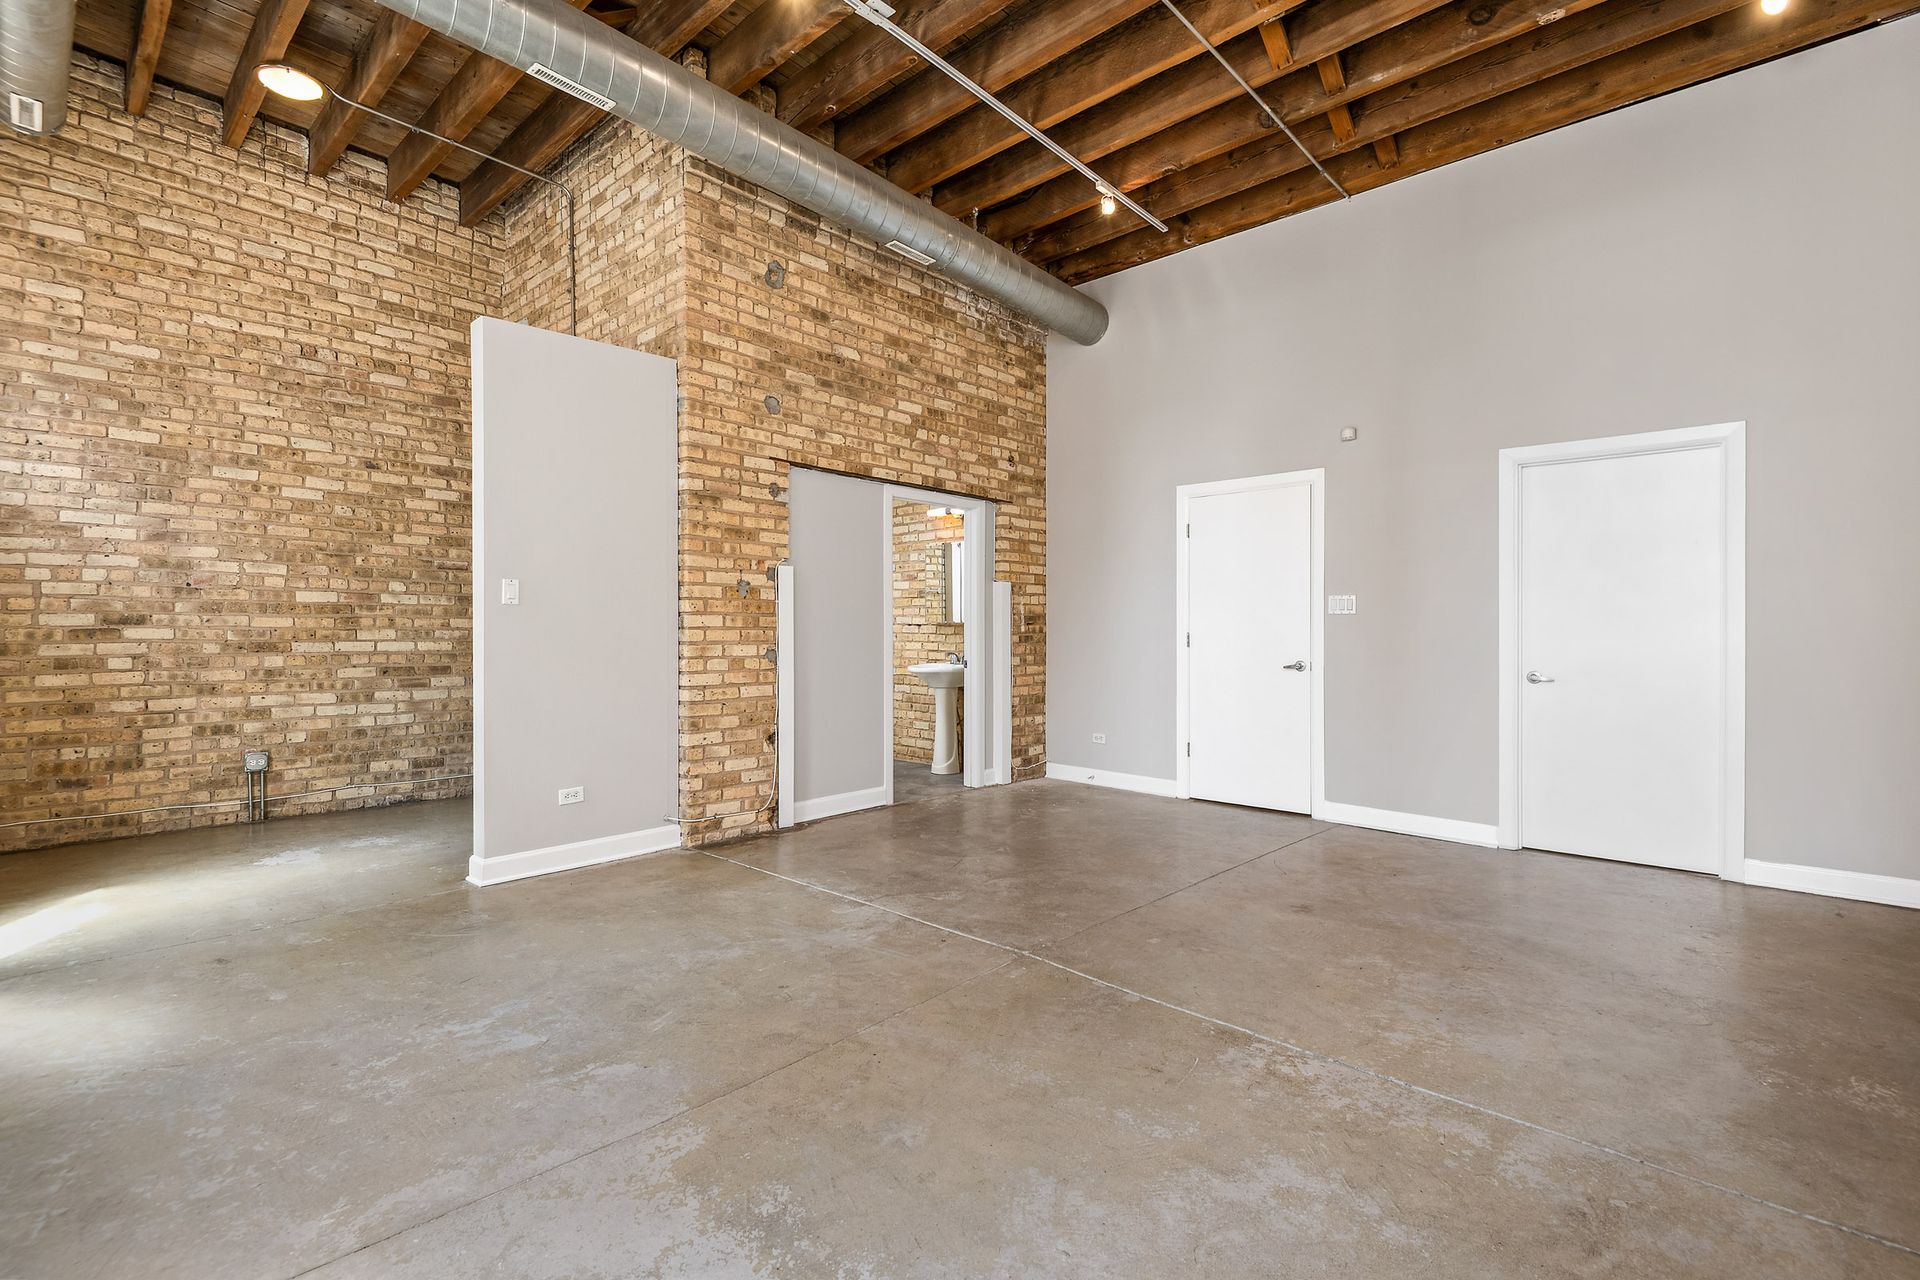 An empty living room with a brick wall and white doors.